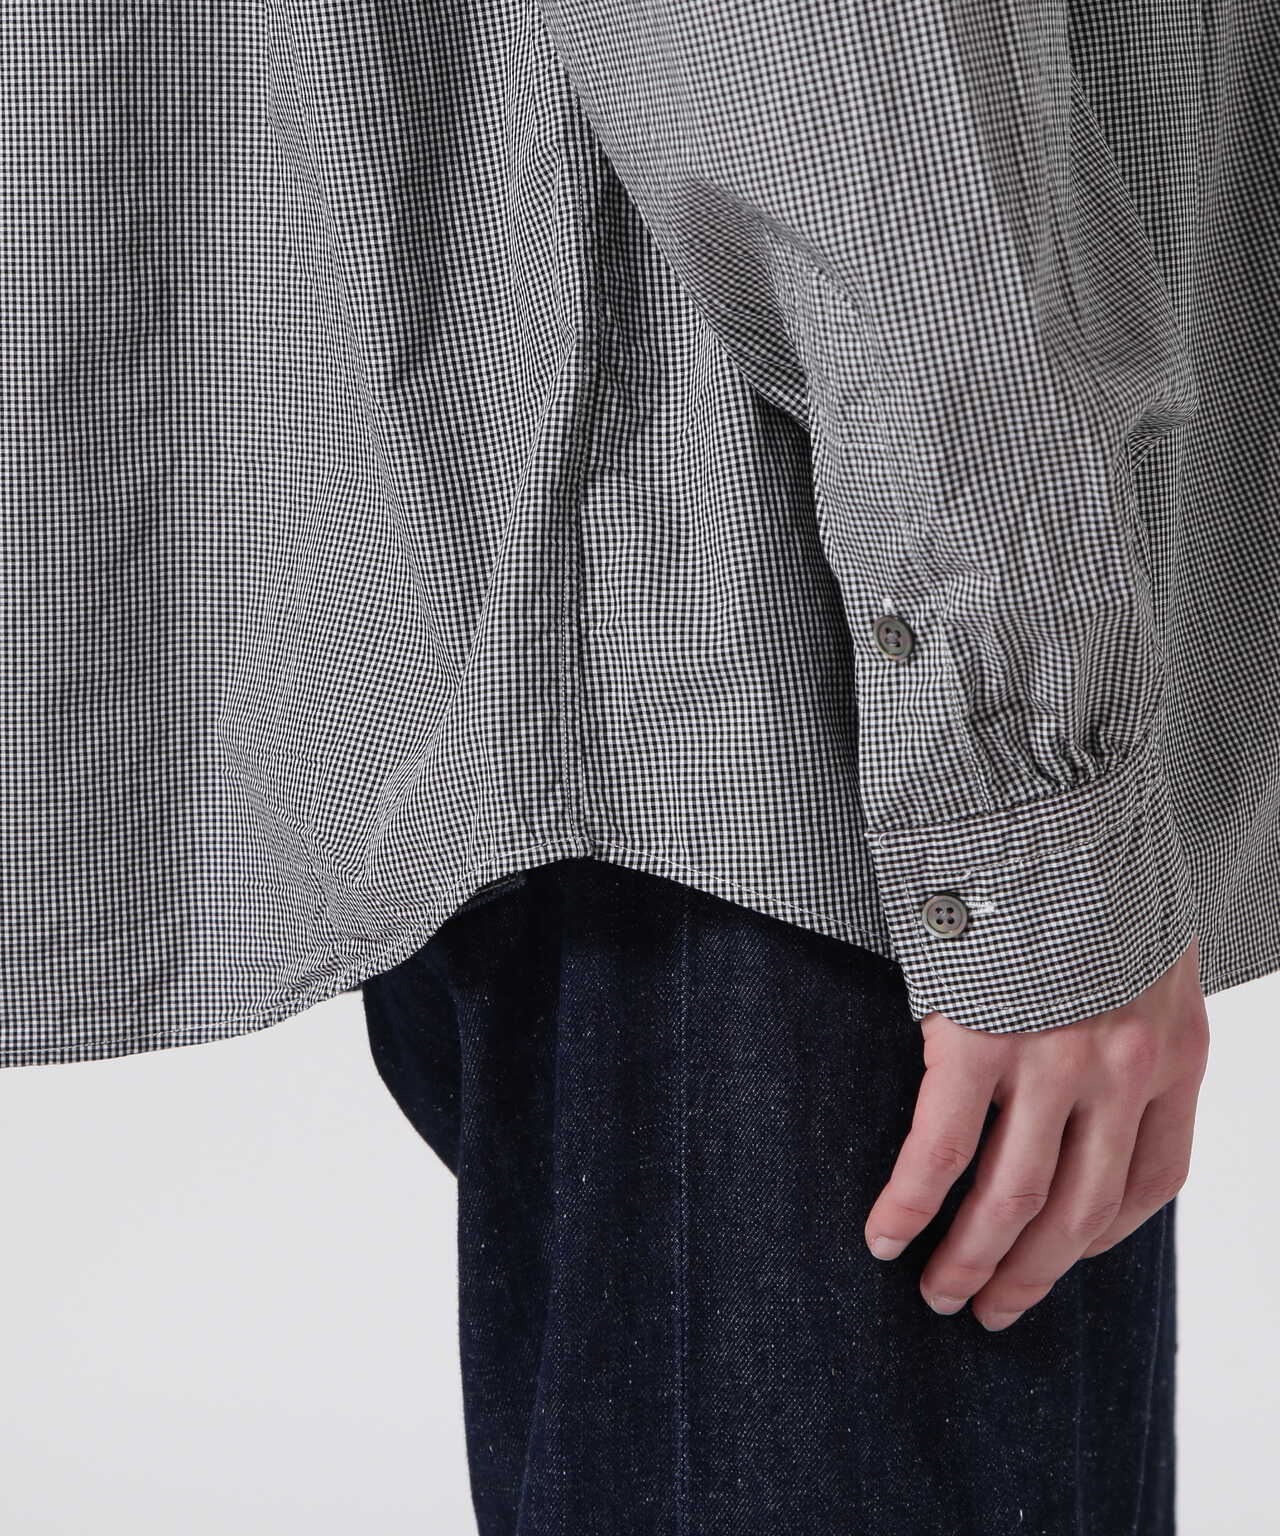 POTER CLASSIC/ポータークラシック　ROLL UP NEW GINGHAM CHECK SHIRT